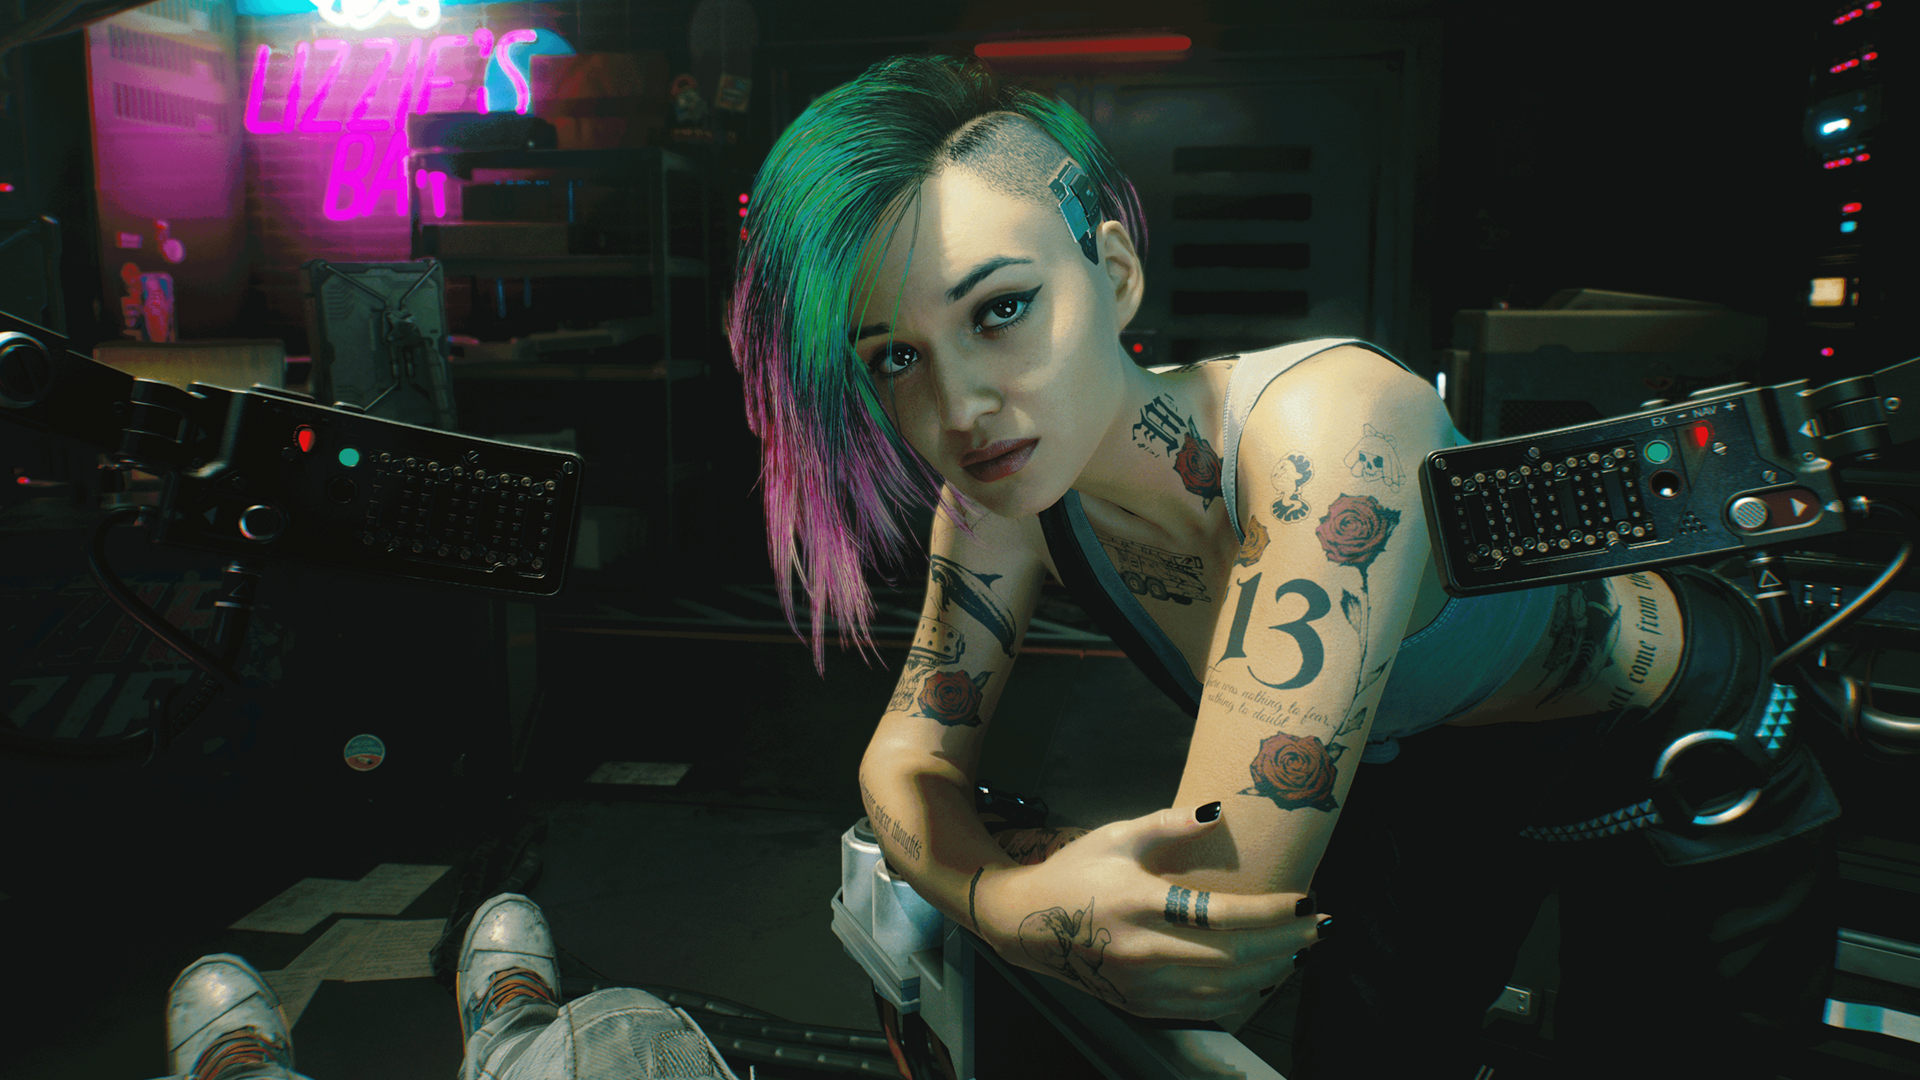 Thoughts on this Cyberpunk 2077 tribute - Art Design Support - Developer  Forum